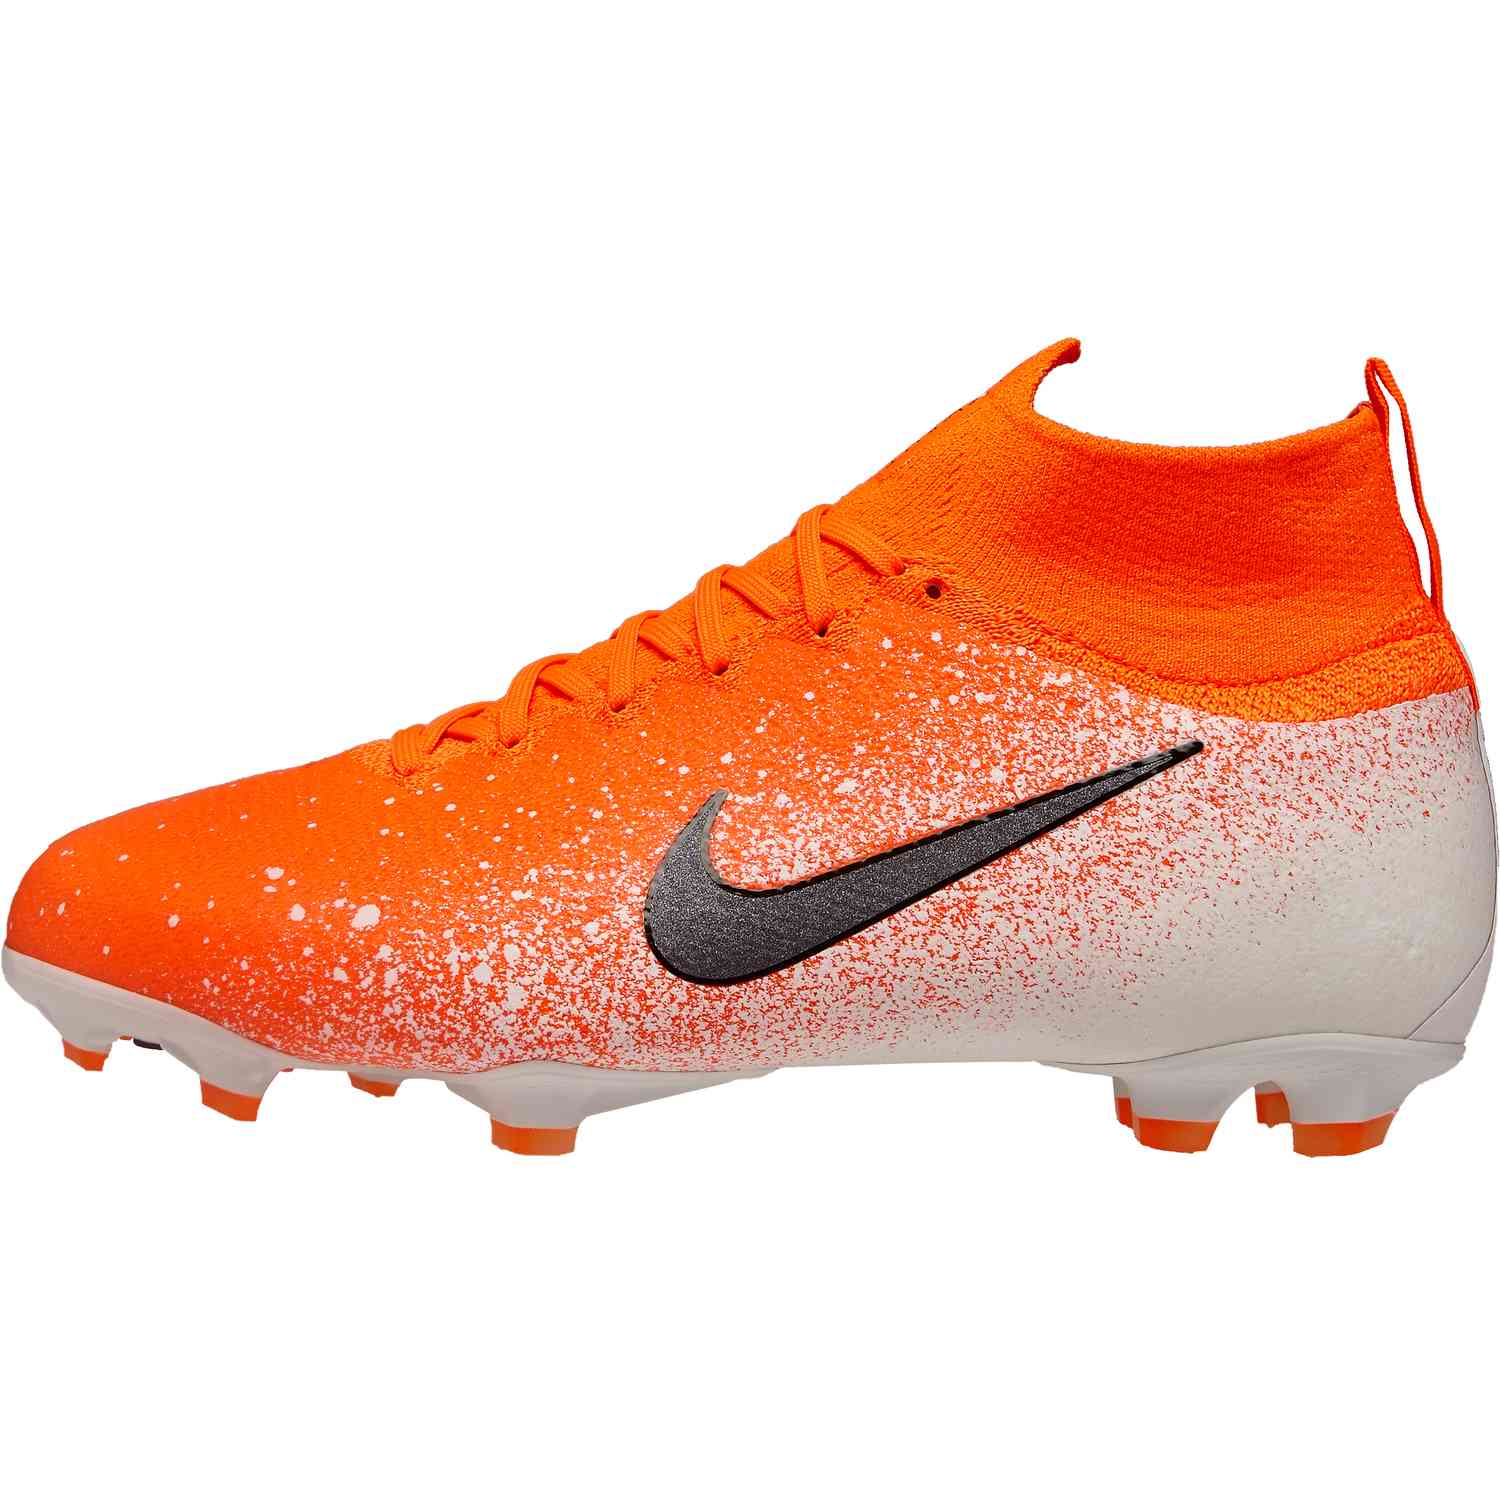 Nike Mercurial Superfly 6 Academy GS MG Jr from 55. Shoes